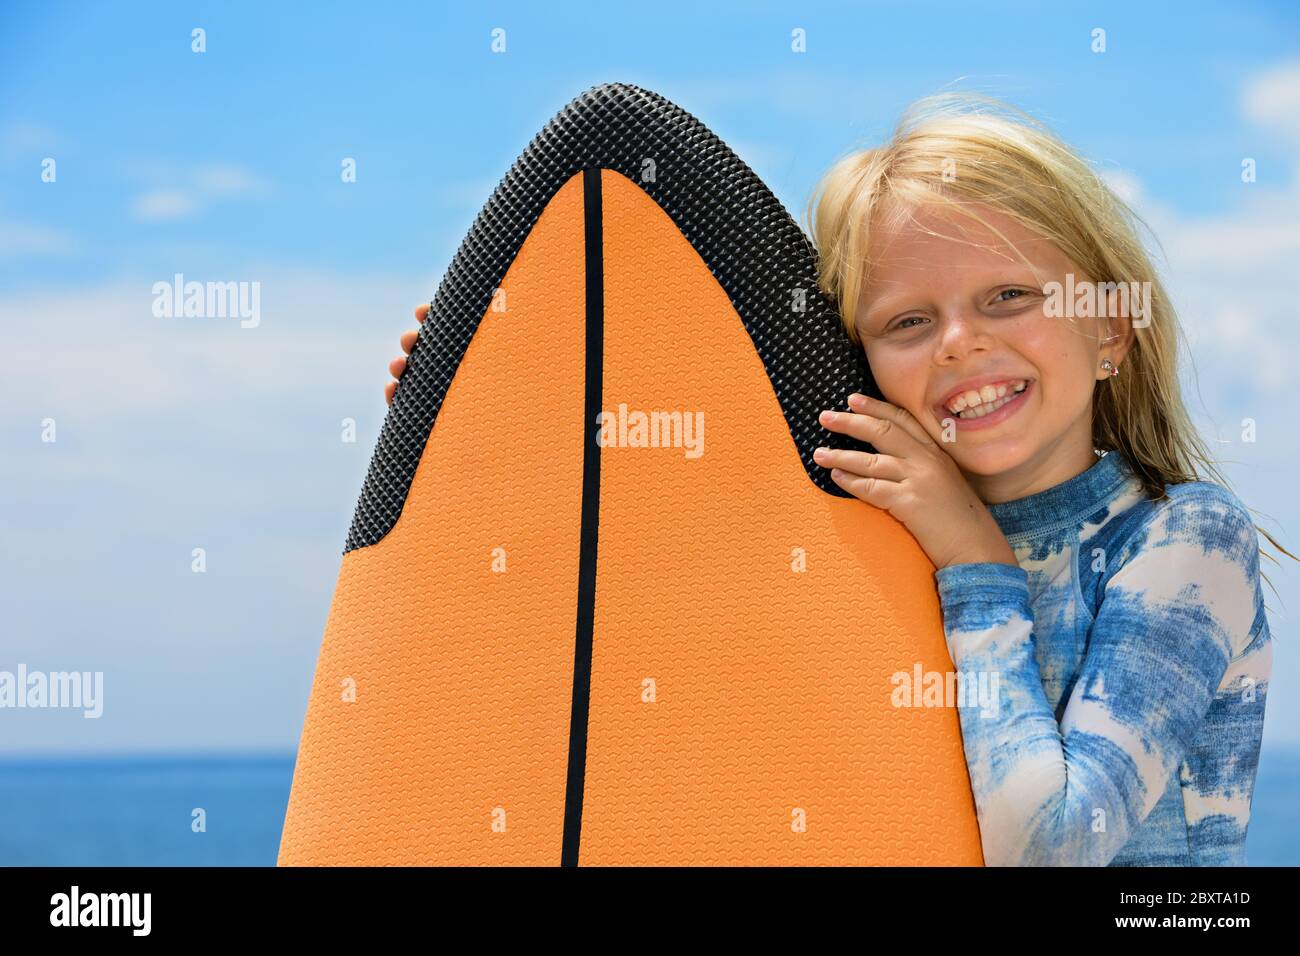 Happy baby girl - young surfer learn to ride on surfboard with fun on sea waves. Active family lifestyle, kids outdoor water sport lessons, activity Stock Photo